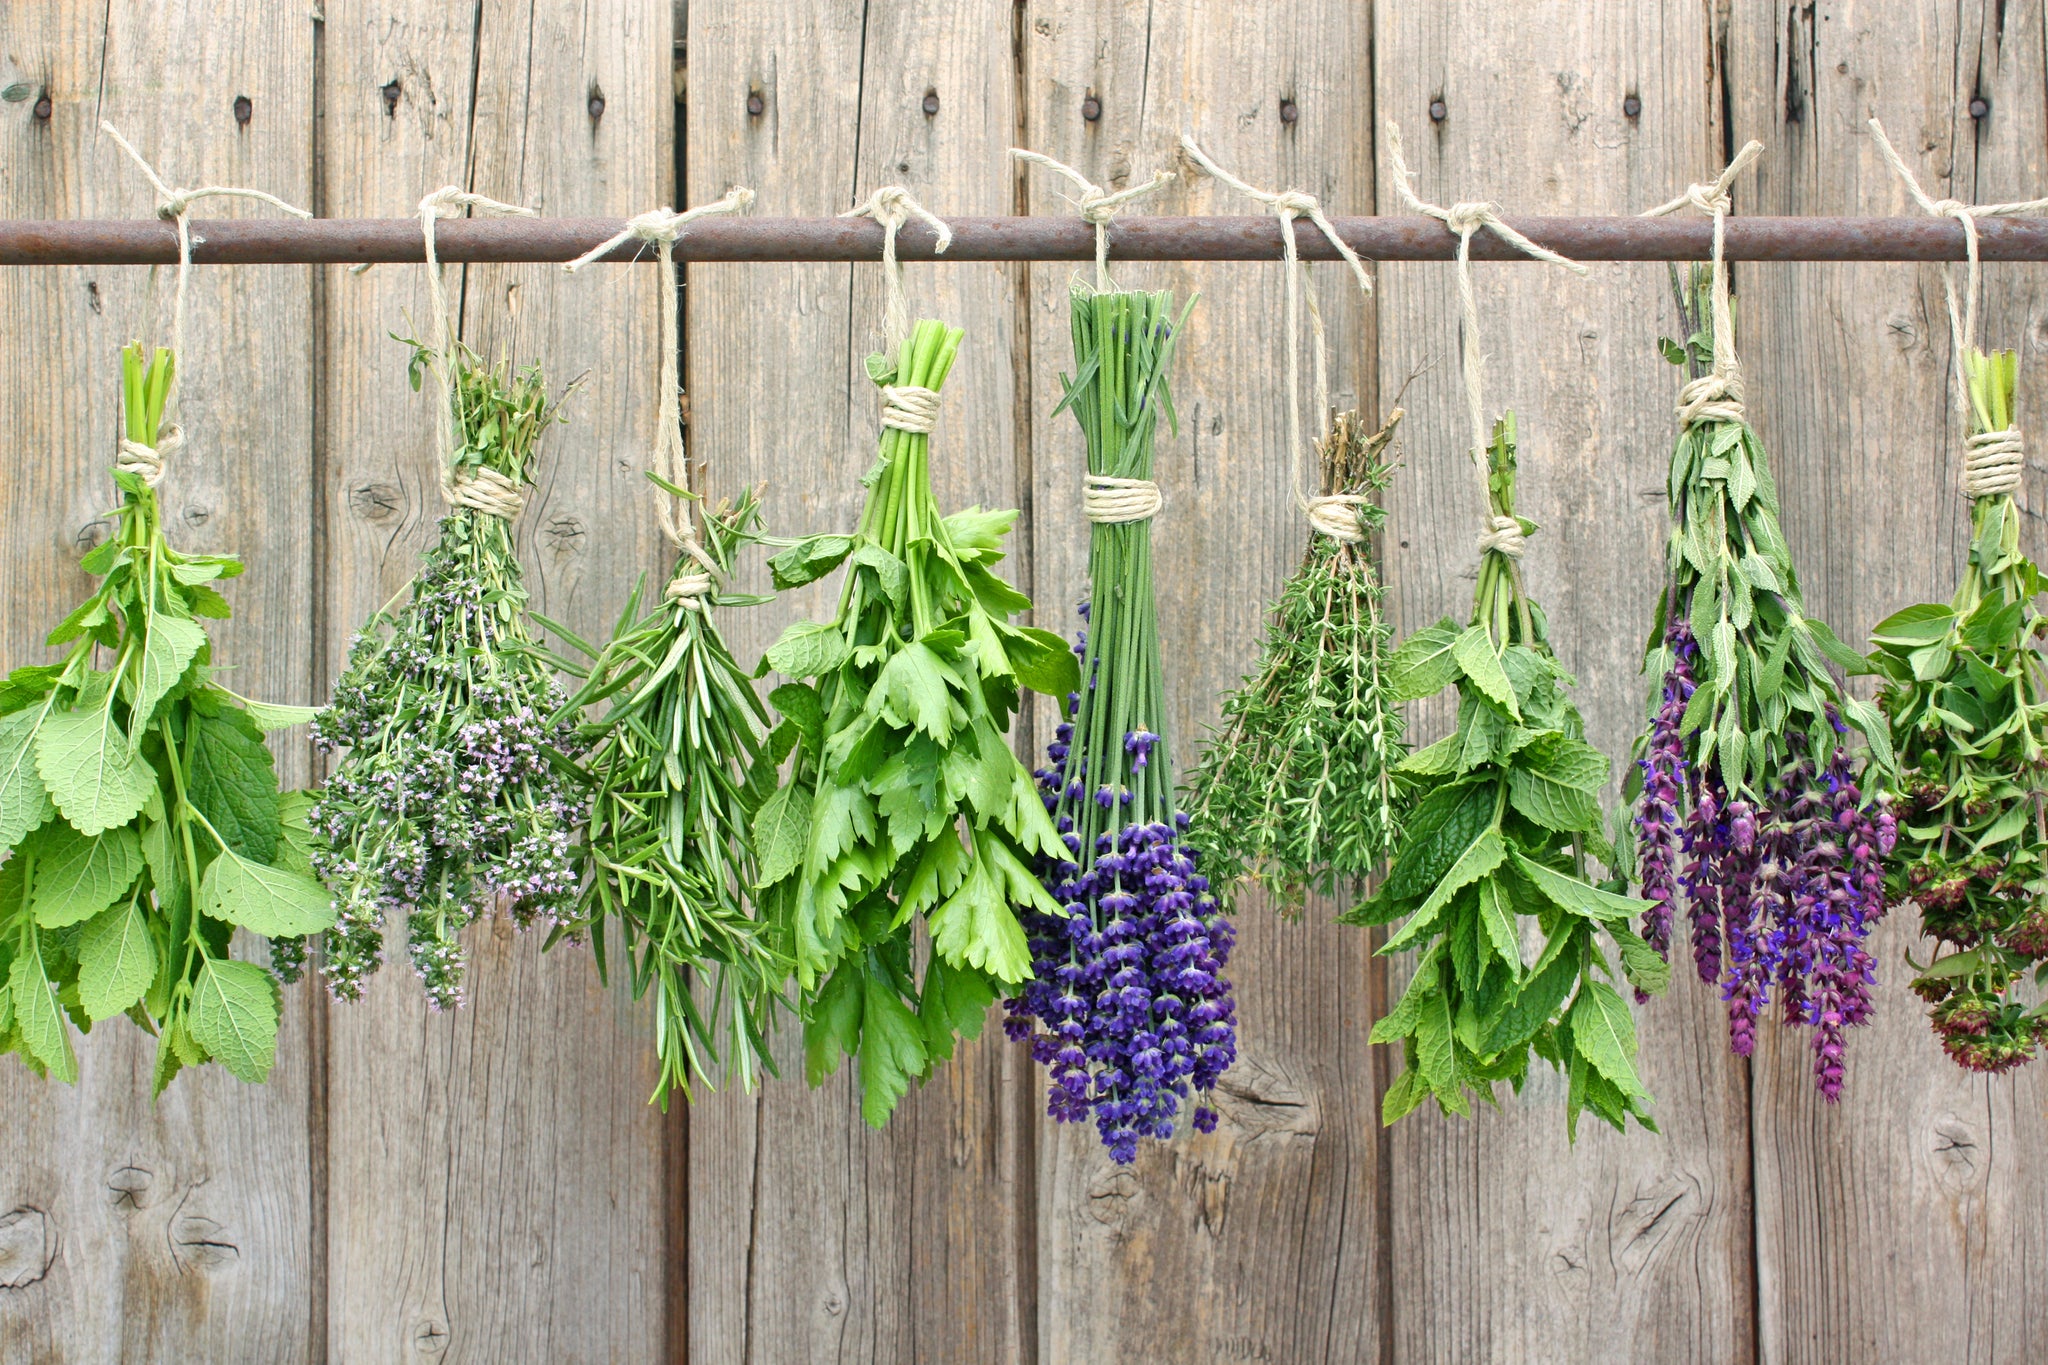 How herbs can help to boost immunity